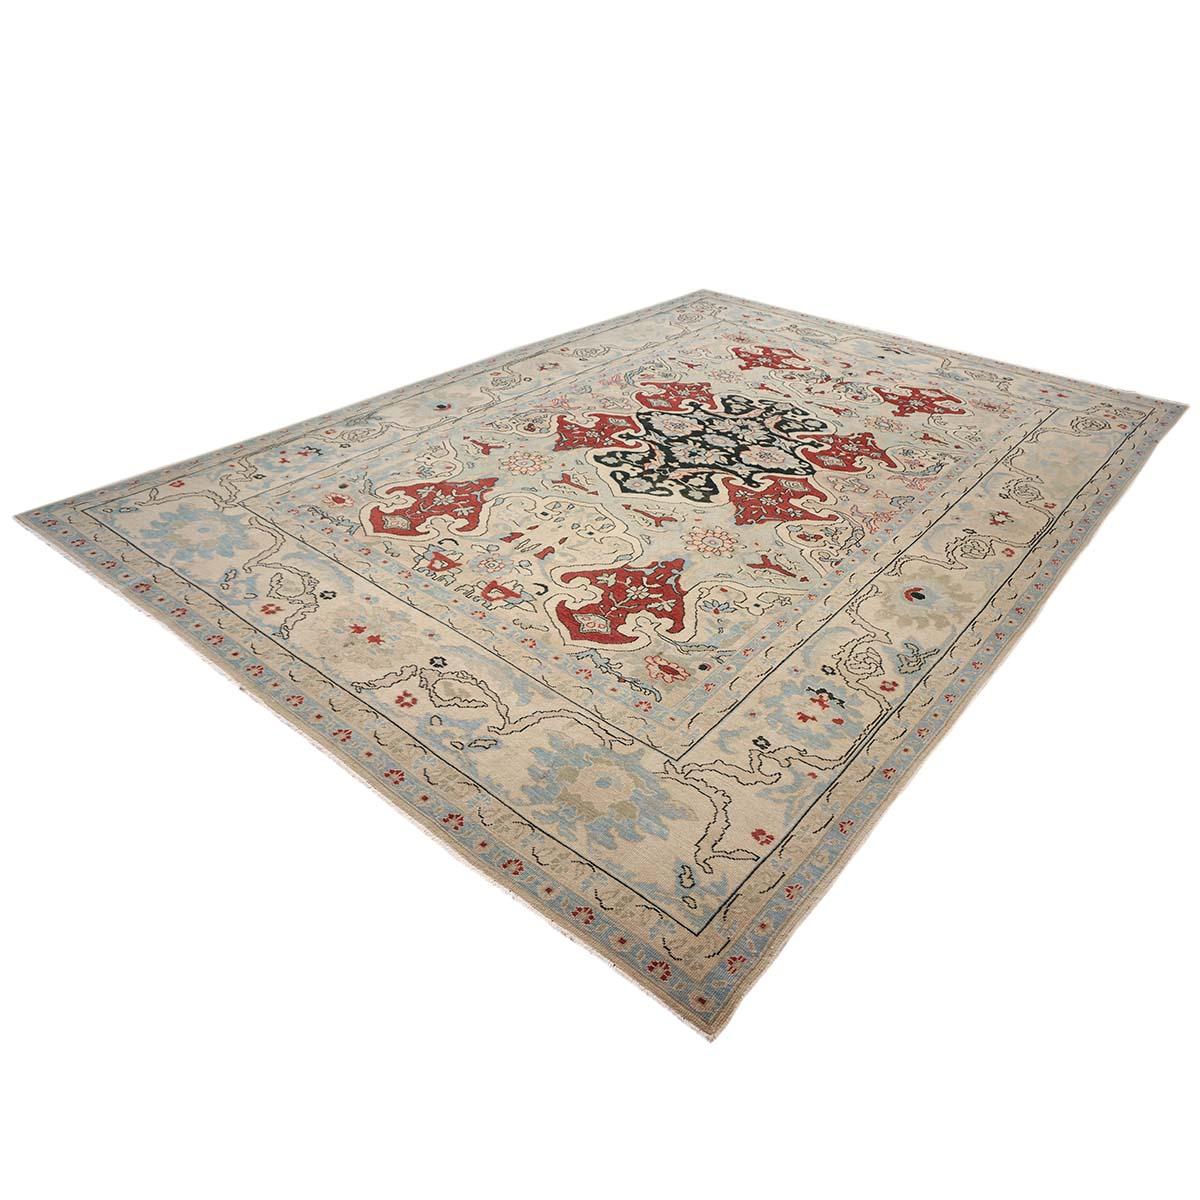 10x14 area rugs